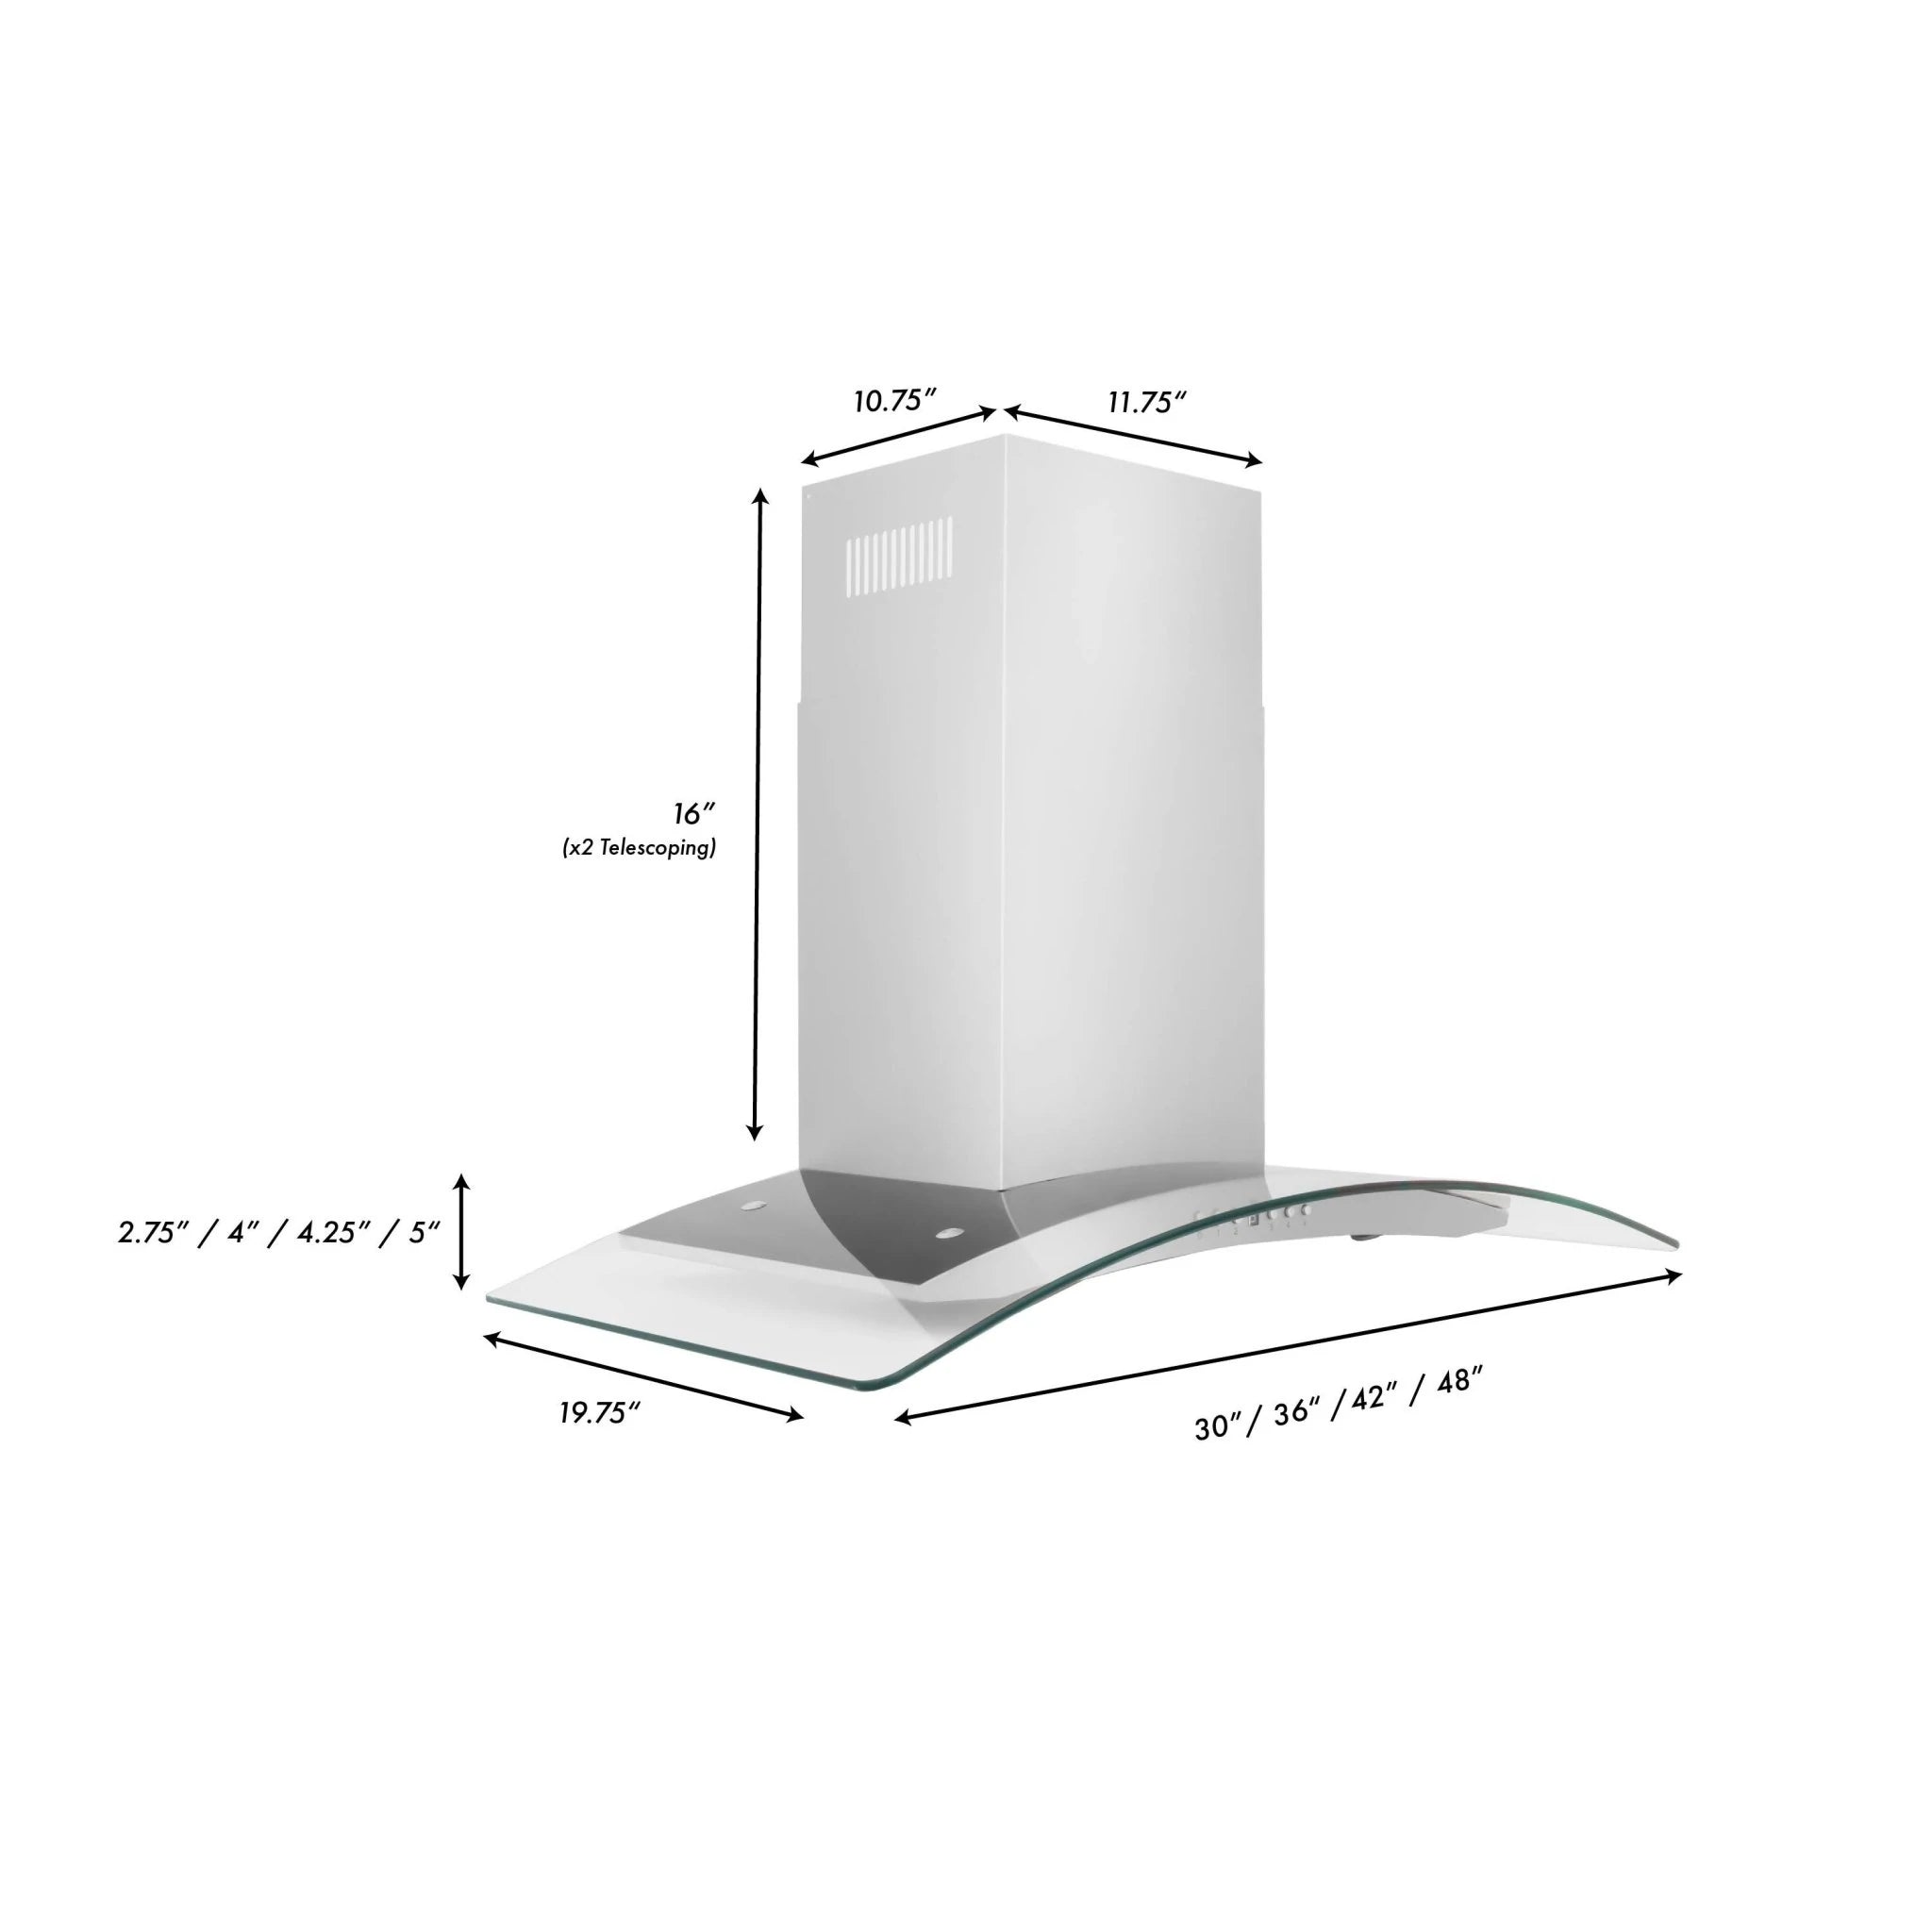 ZLINE Convertible Vent Wall Mount Range Hood in Stainless Steel & Glass (KN4)